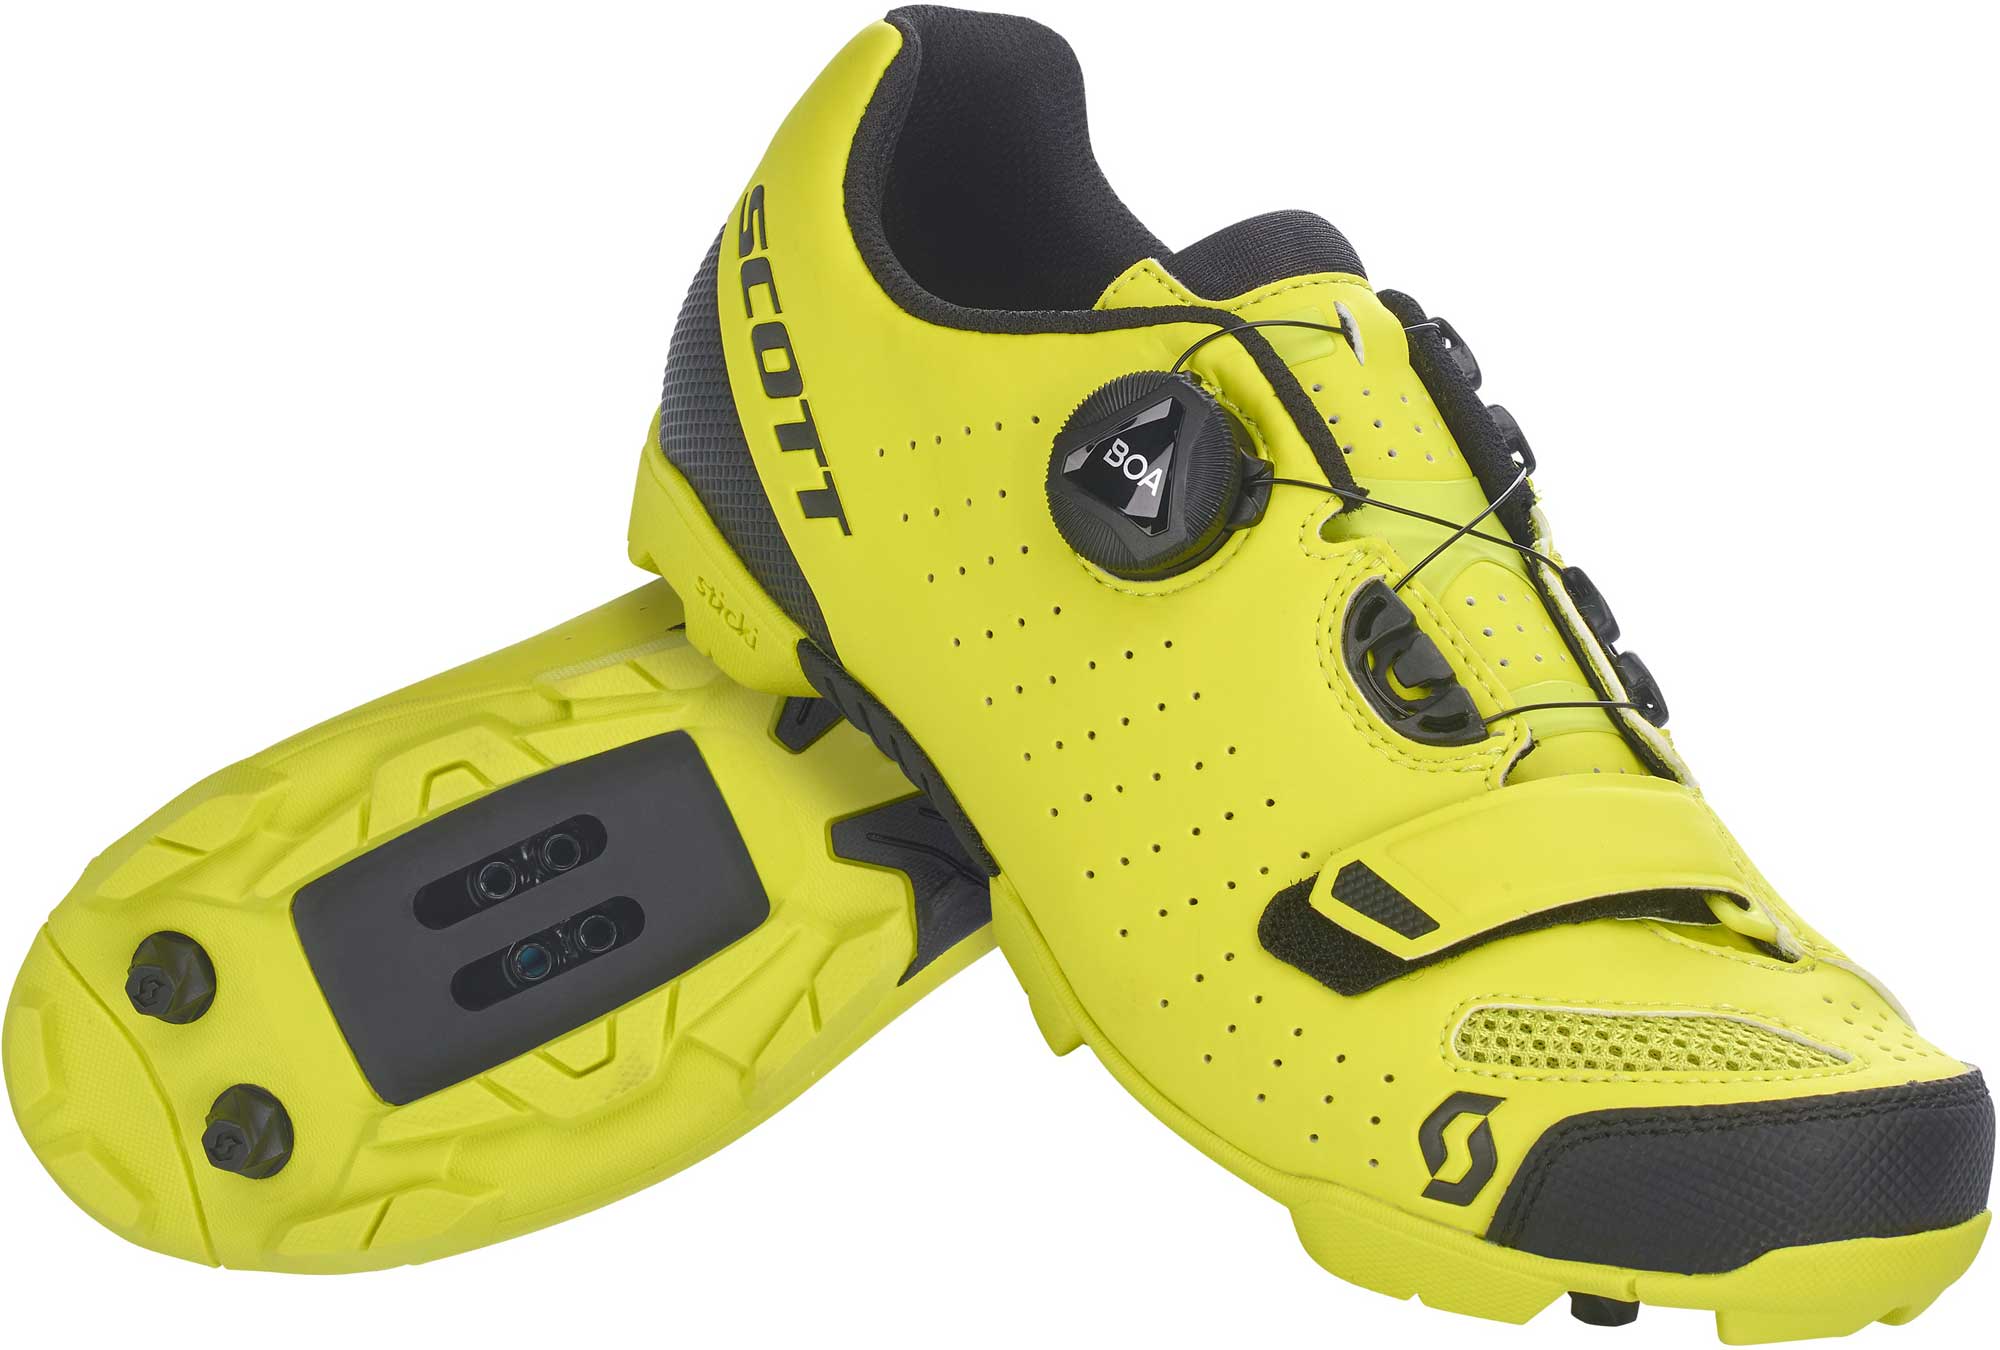 Juniors’ cycling shoes